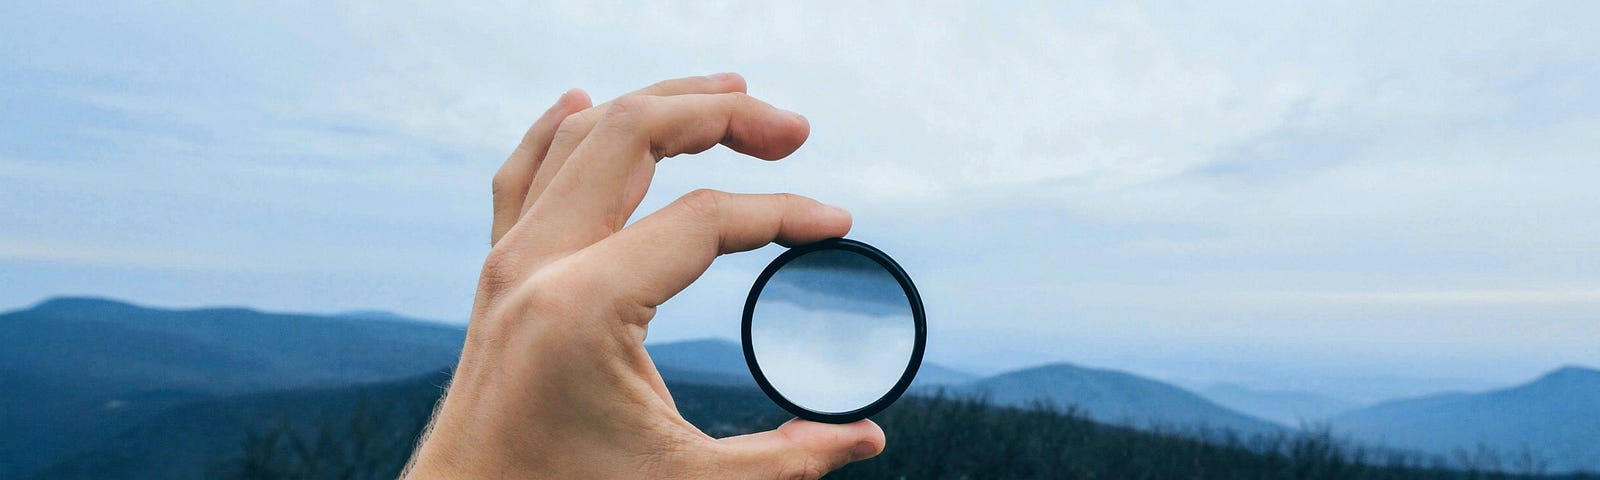 Someone holding a lens, overlooking a forest from a vista point.